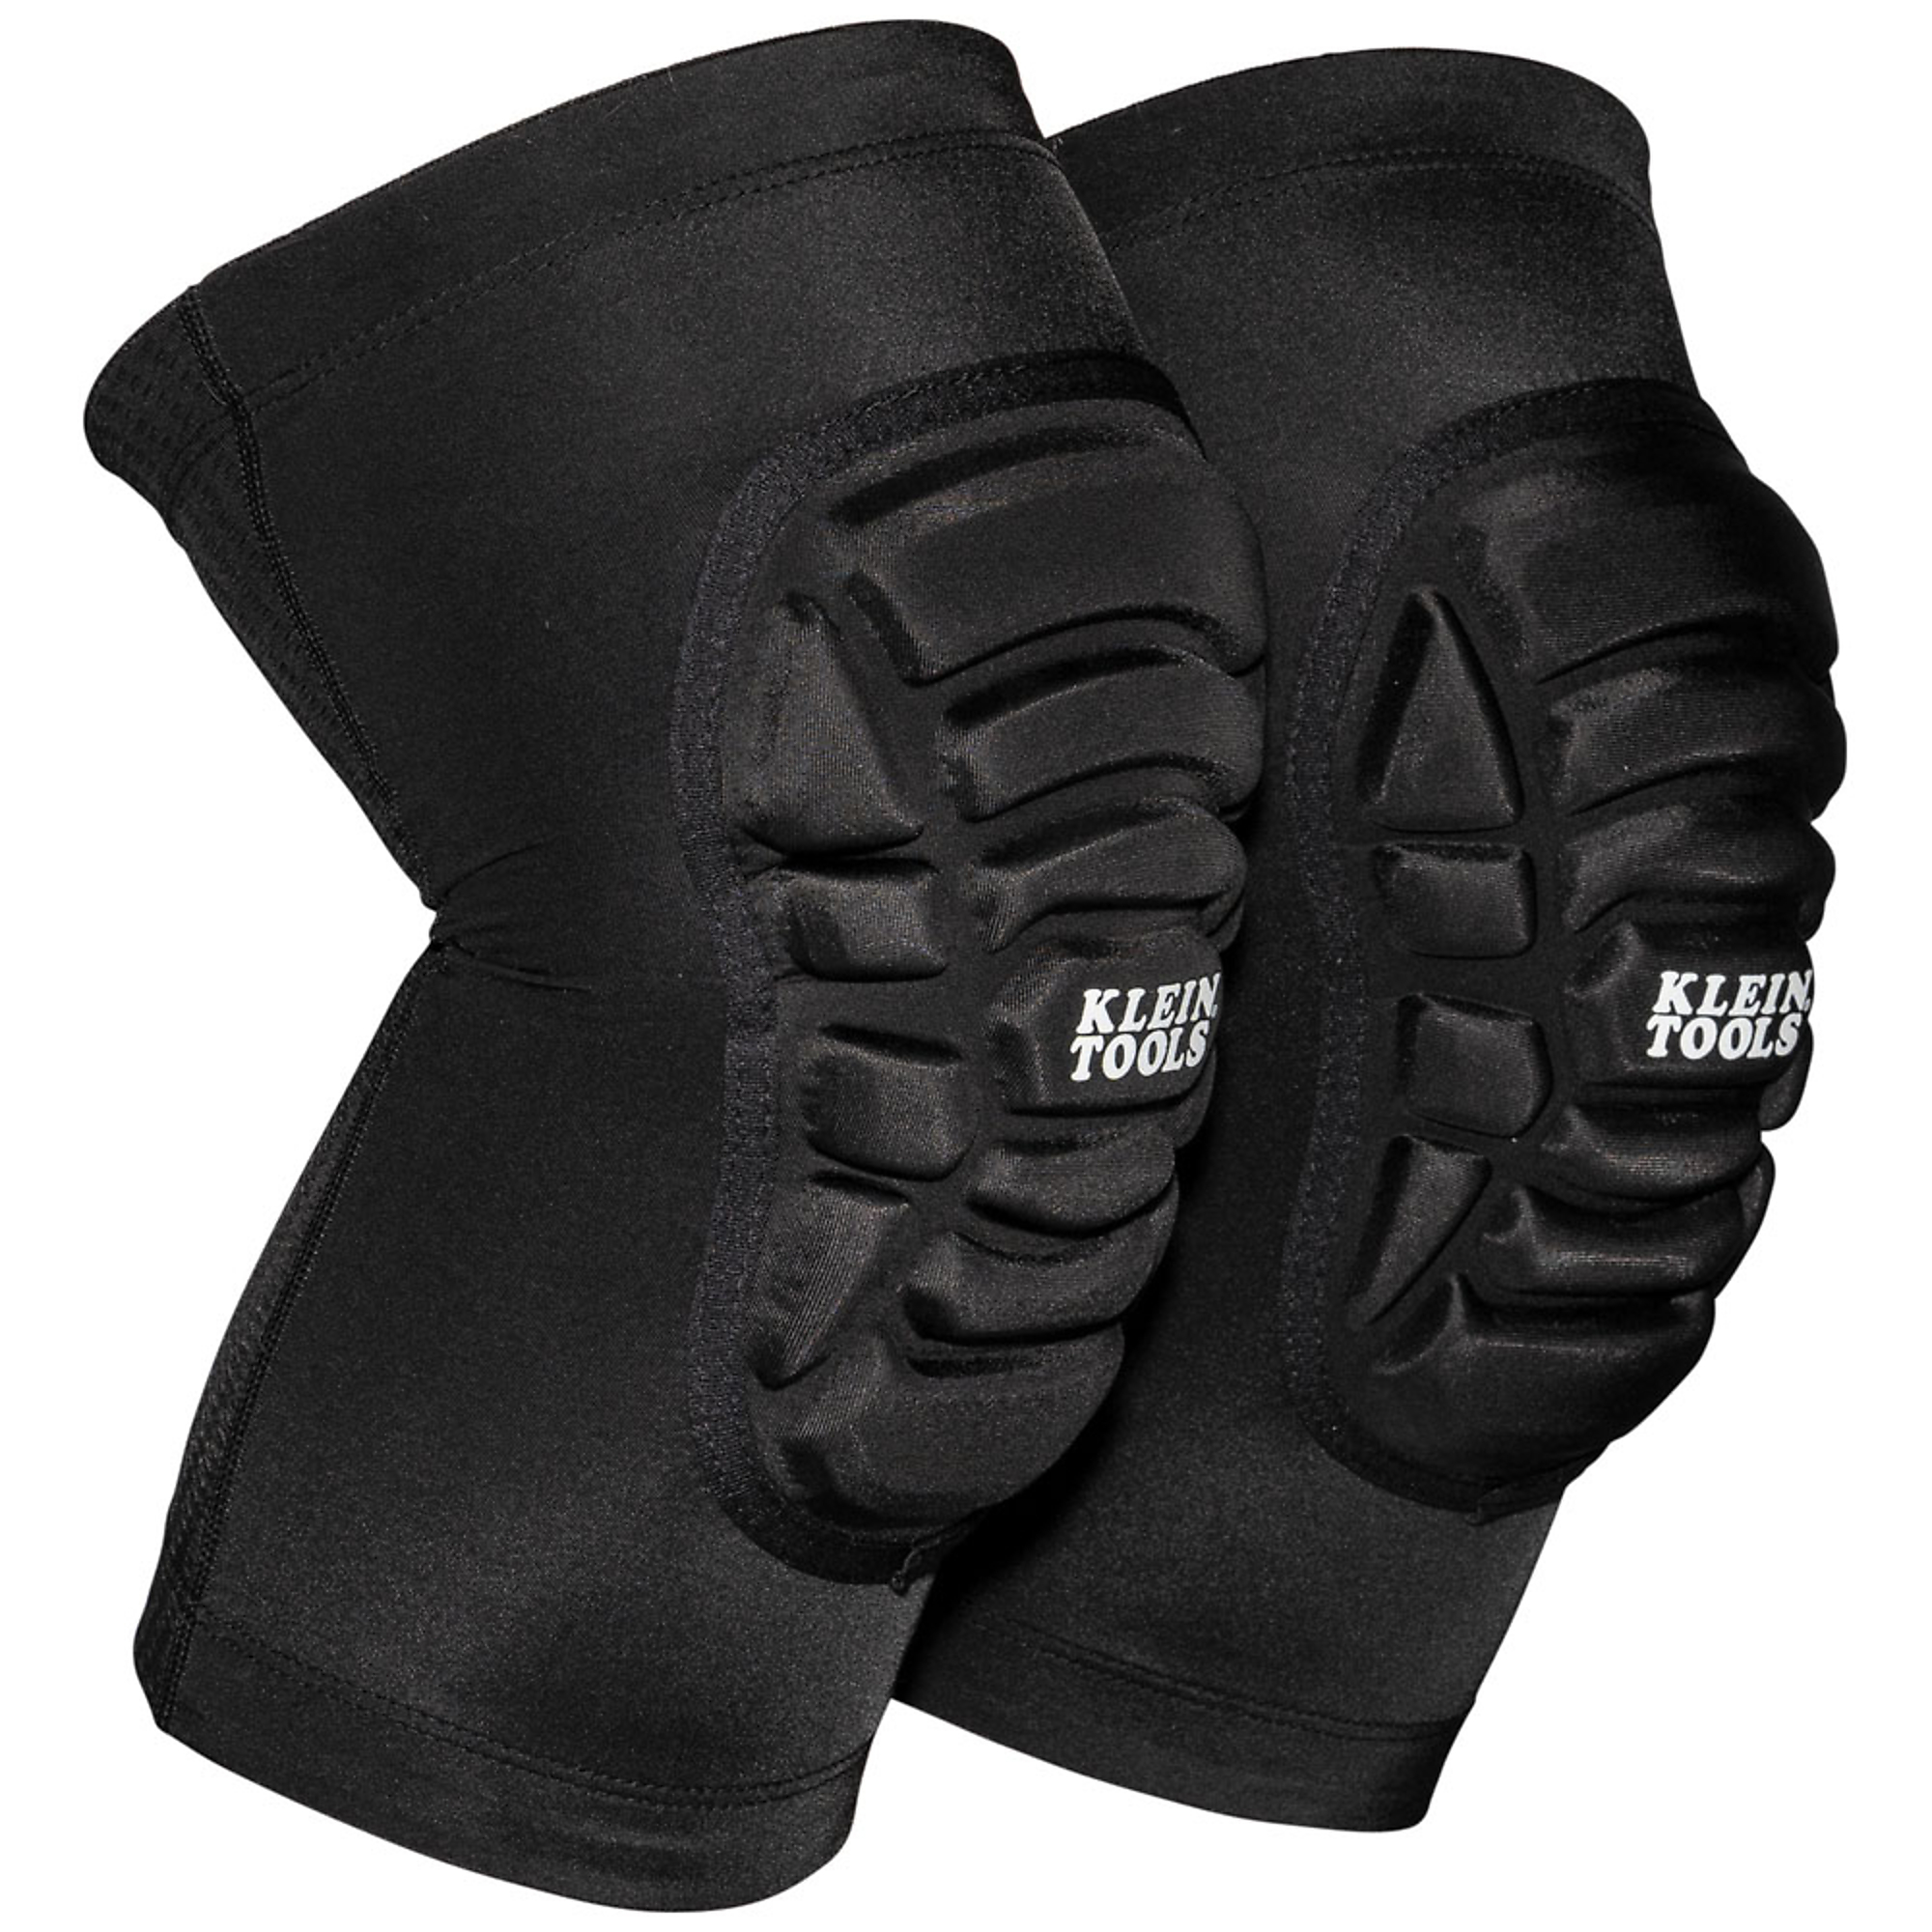 Klein Tools, Lightweight Knee Pad Sleeves, L/XL, Included (qty.) 2 Color Black, Model 60592